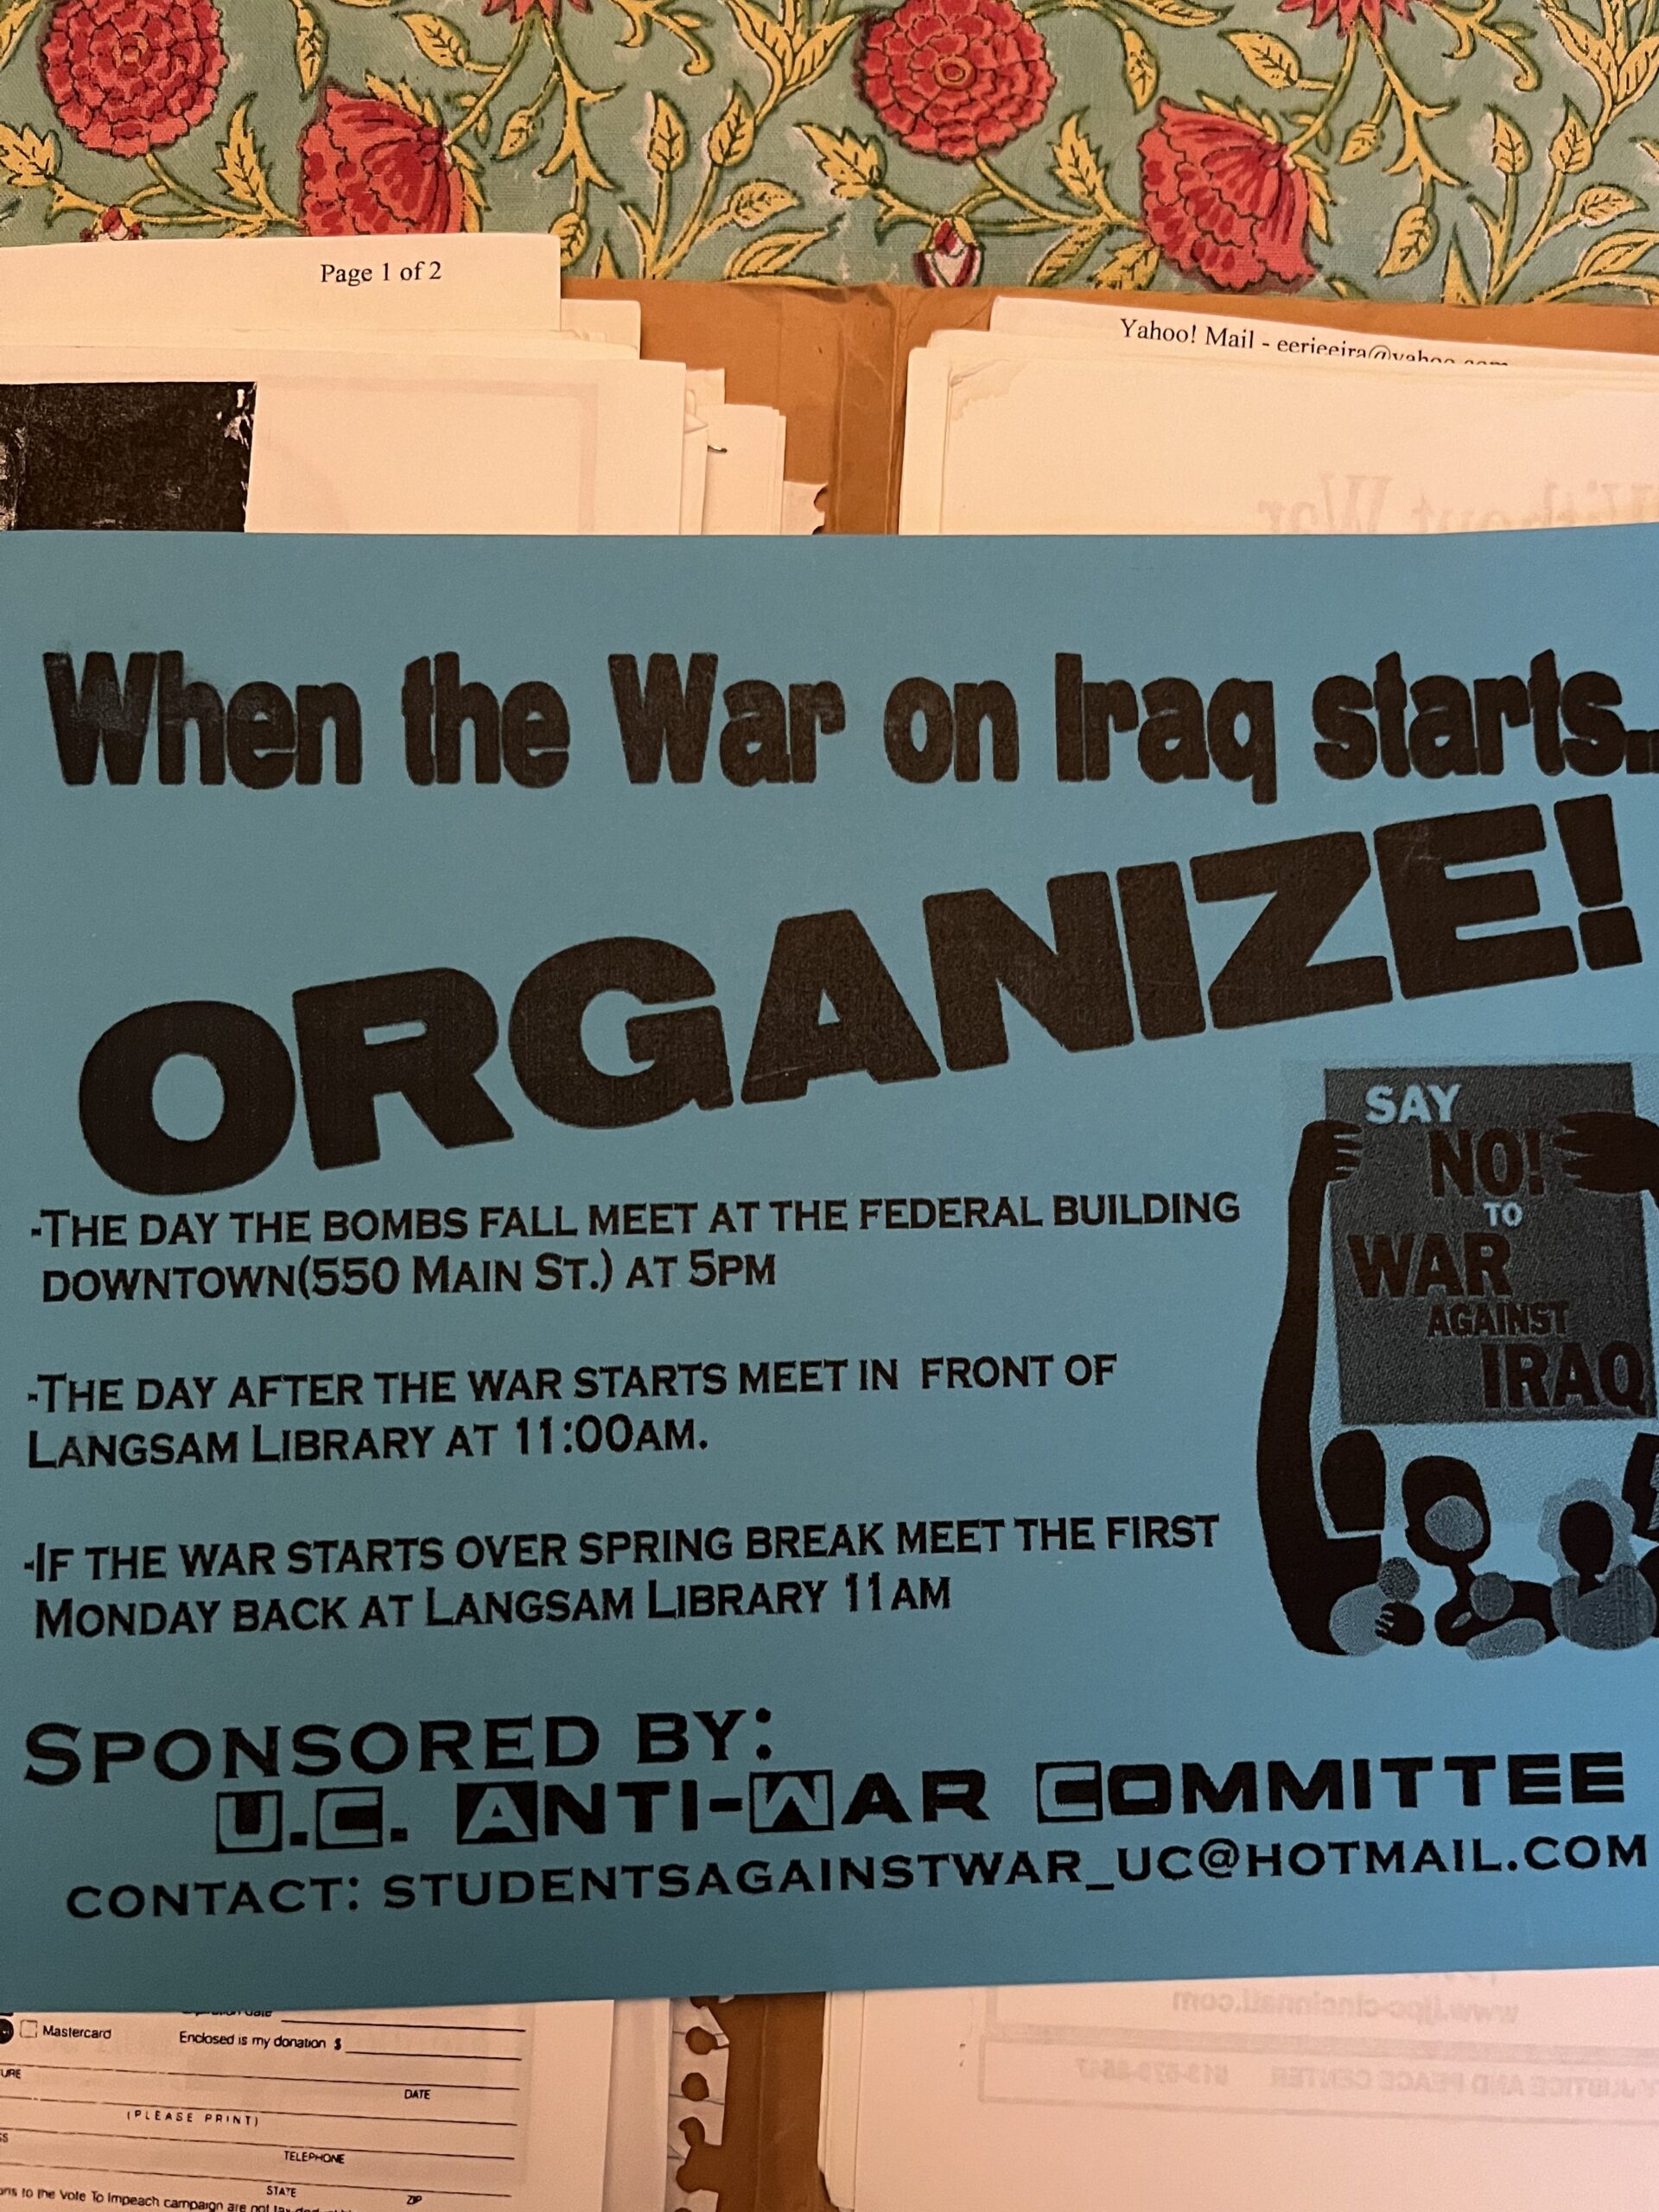 Flyer from UC Anti-War Committee advertising demonstration plans to protest the beginning of Iraq War